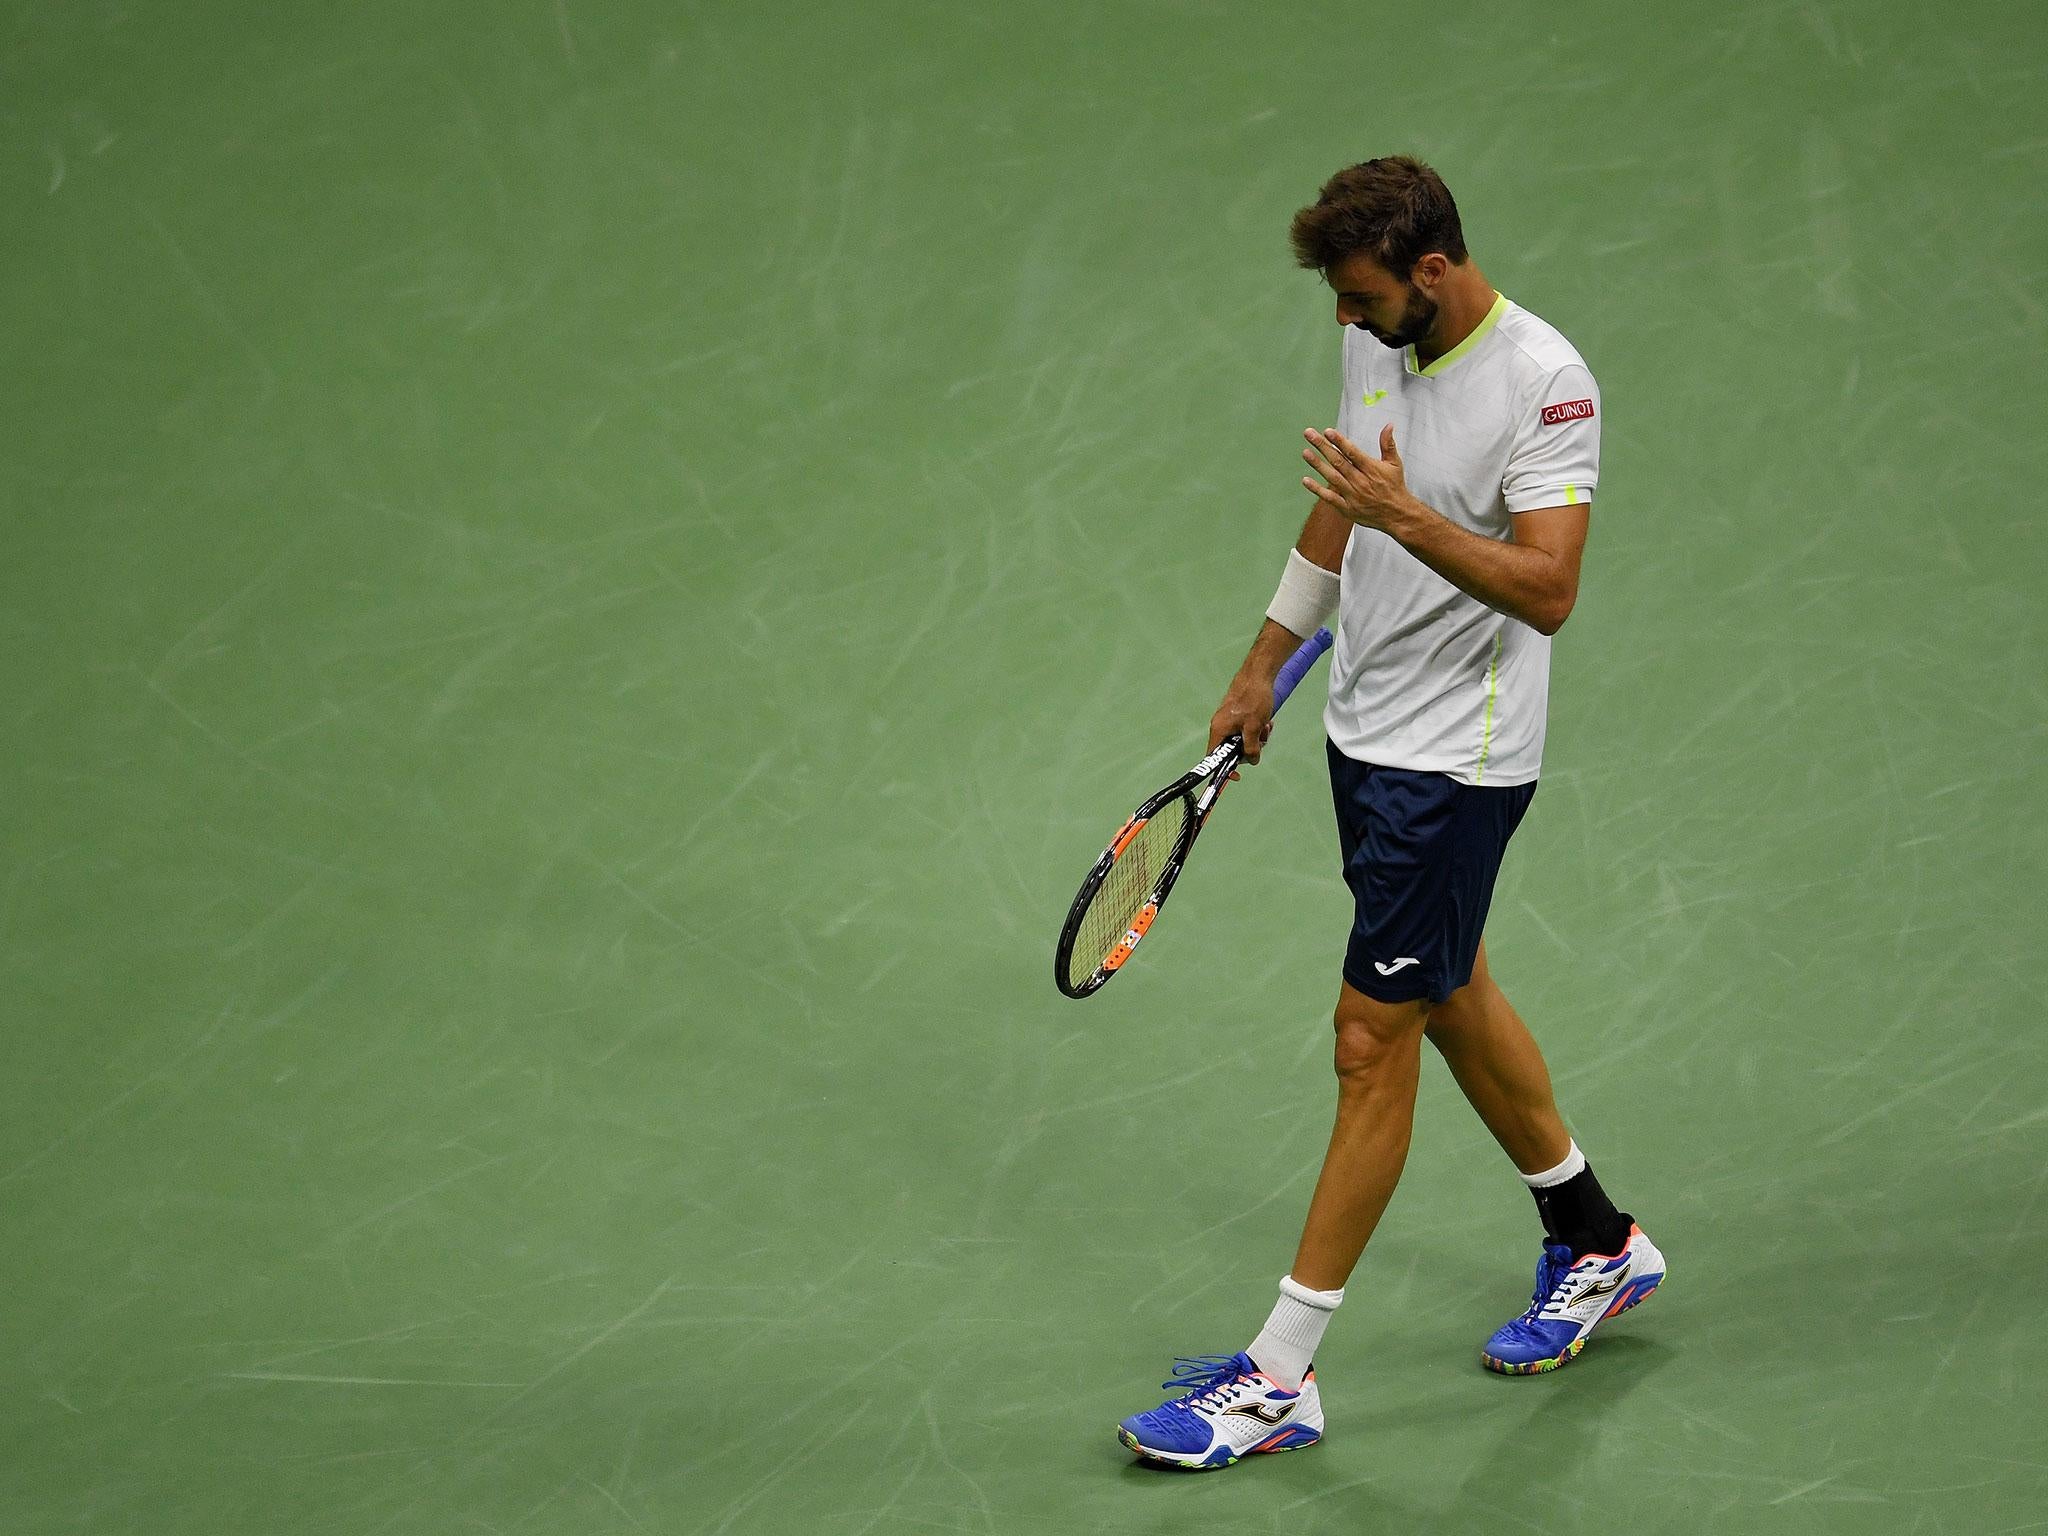 Marcel Granollers was swept aside by Andy Murray